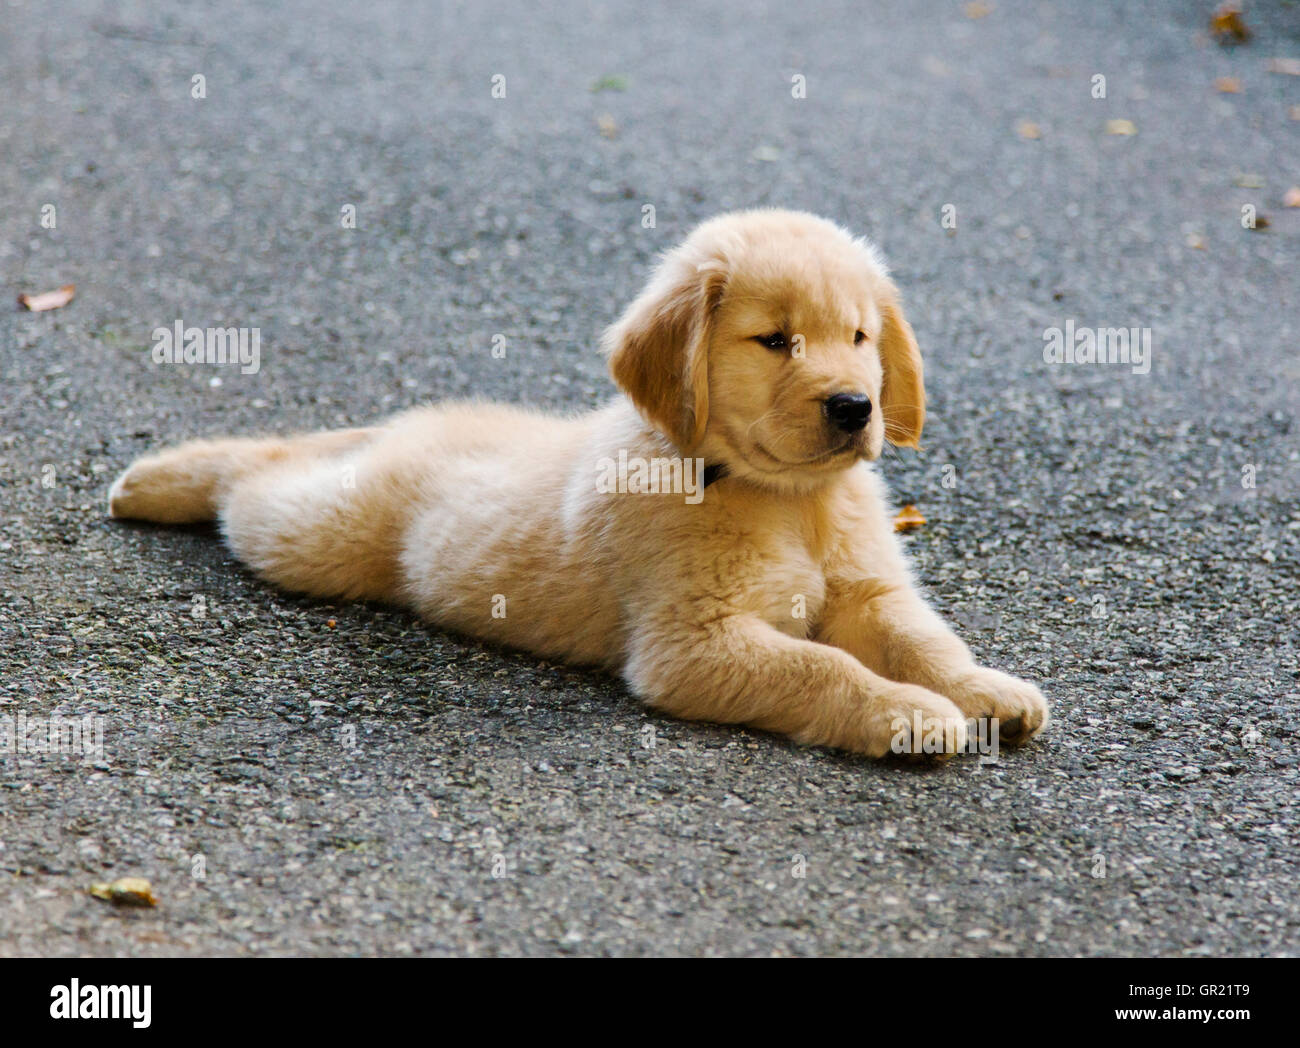 Eight week old Golden Retriever puppy lying in a driveway. Stock Photo